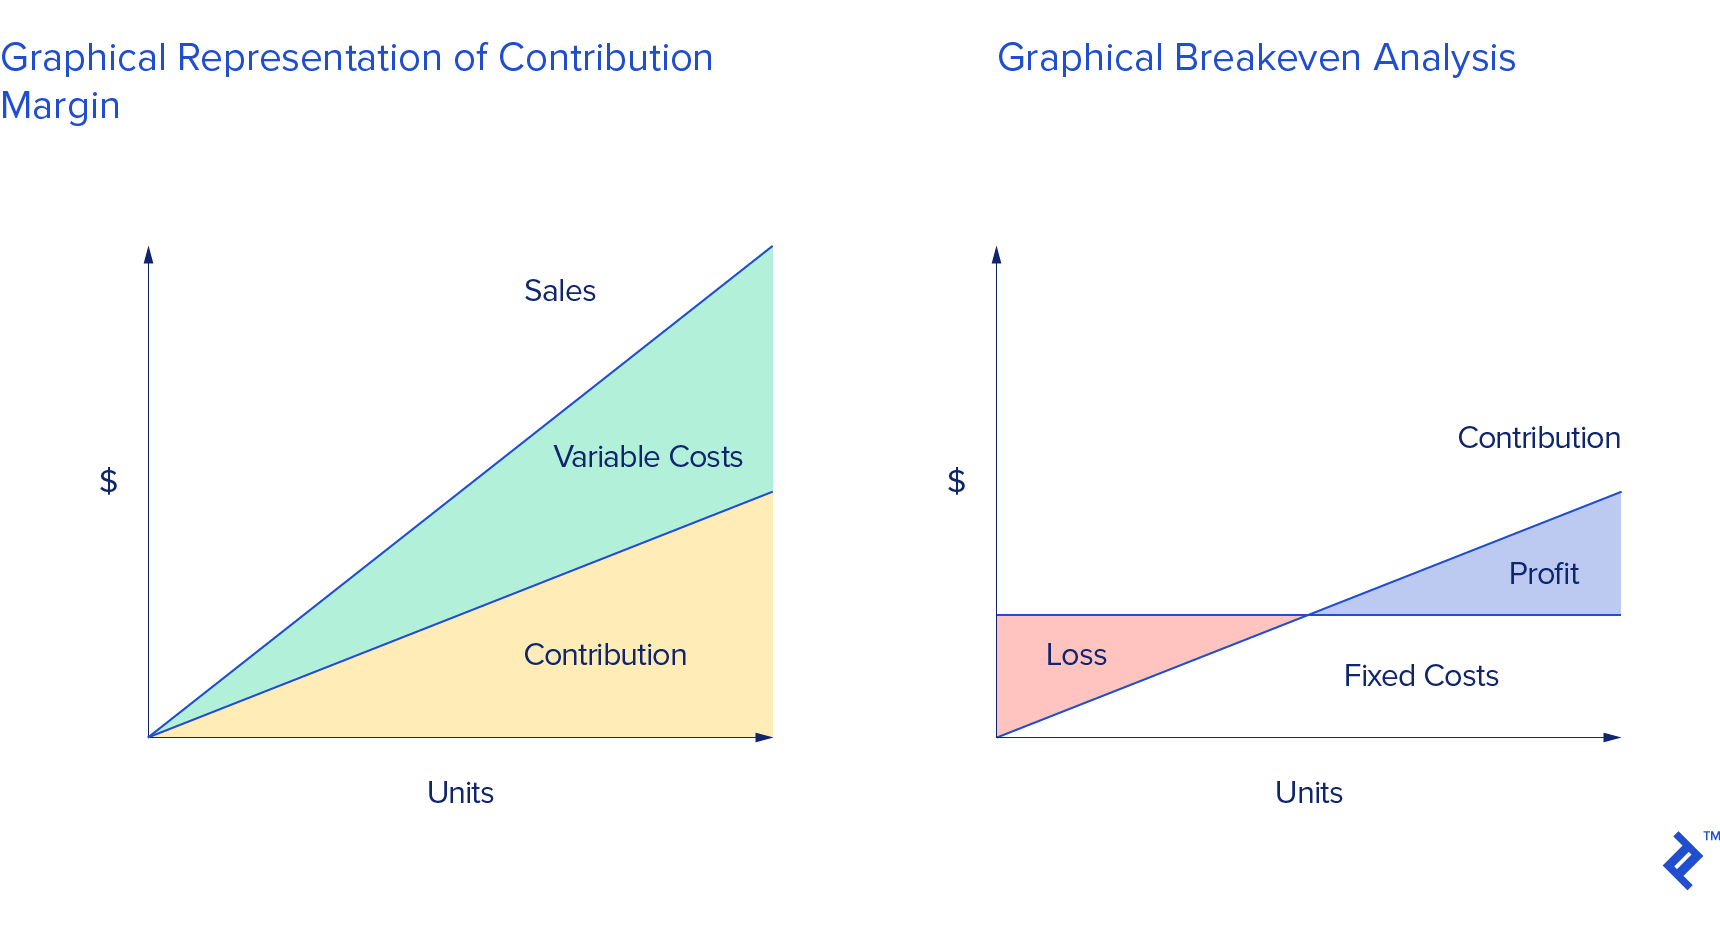 Charts of graphical representation of contribution margin on the left and graphical breakeven analysis on the right